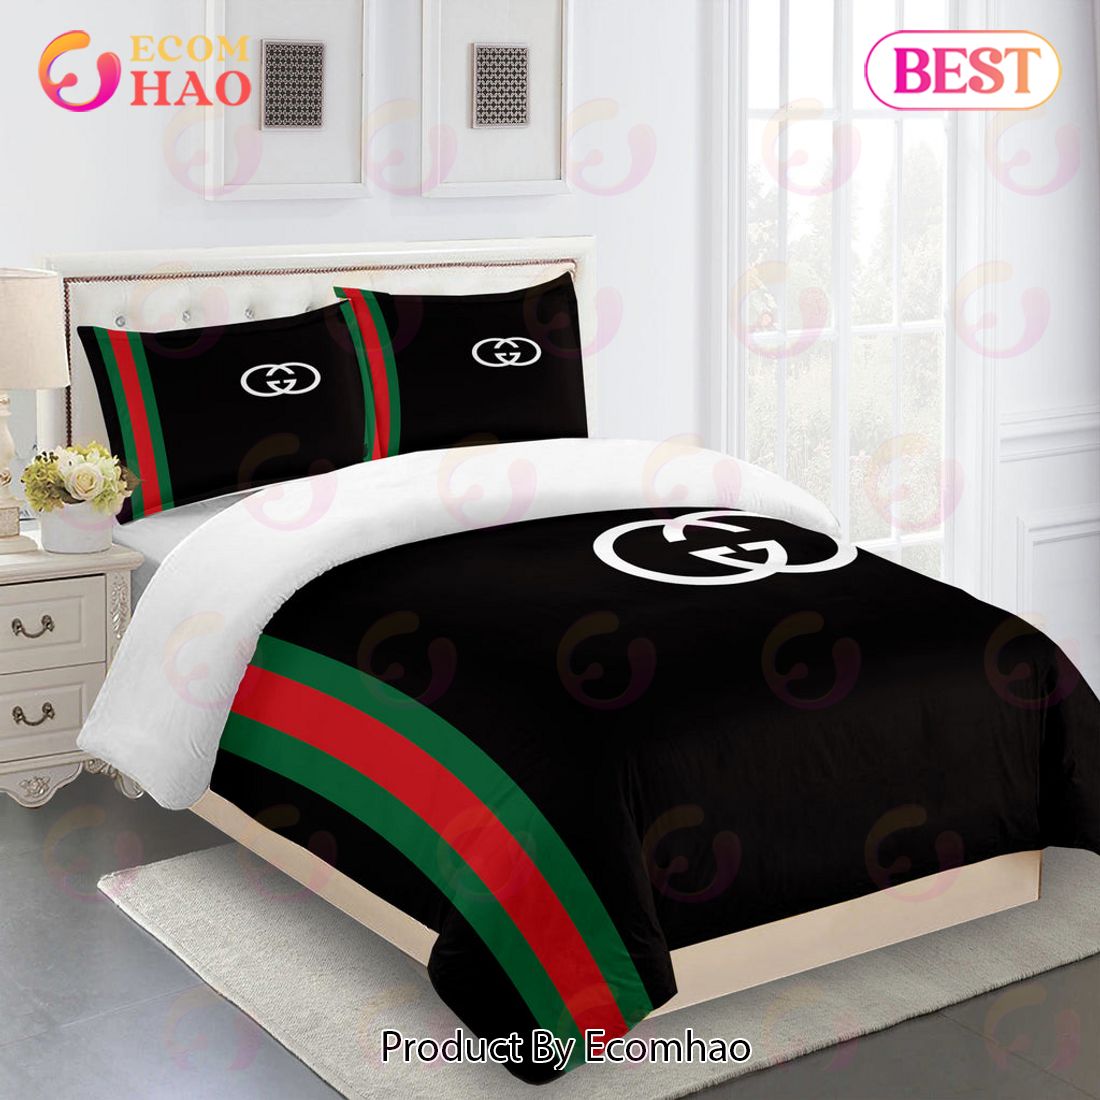 Gucci Bedding Set Black Red Gree Luxury Duvet Cover Bedding Sets - Ecomhao  Store